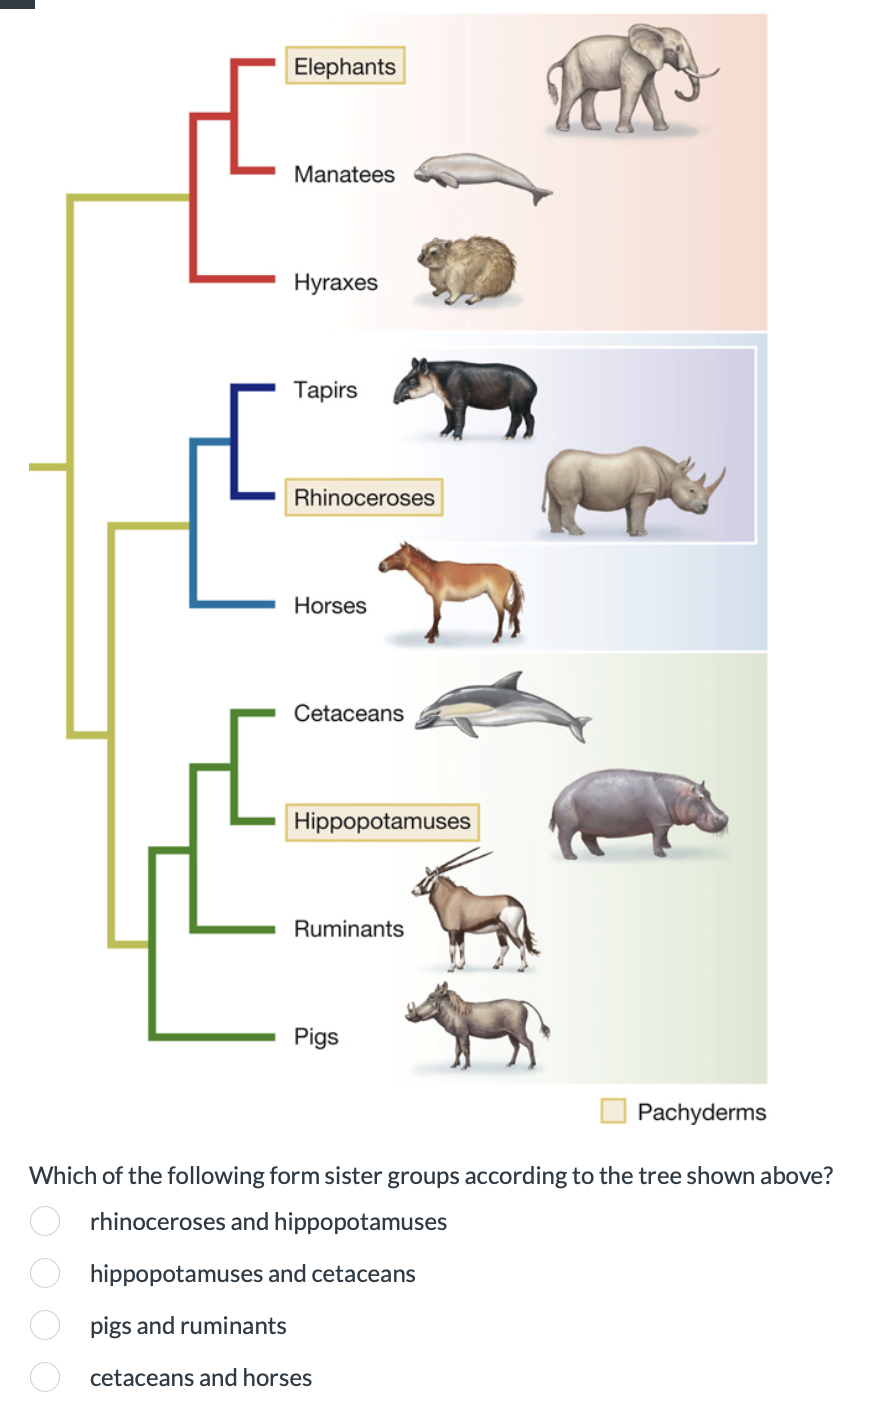 Elephants
Manatees
Hyraxes
Tapirs
Rhinoceroses
Horses
Cetaceans
Hippopotamuses
Ruminants
Pigs
Pachyderms
Which of the following form sister groups according to the tree shown above?
rhinoceroses and hippopotamuses
hippopotamuses and cetaceans
pigs and ruminants
cetaceans and horses